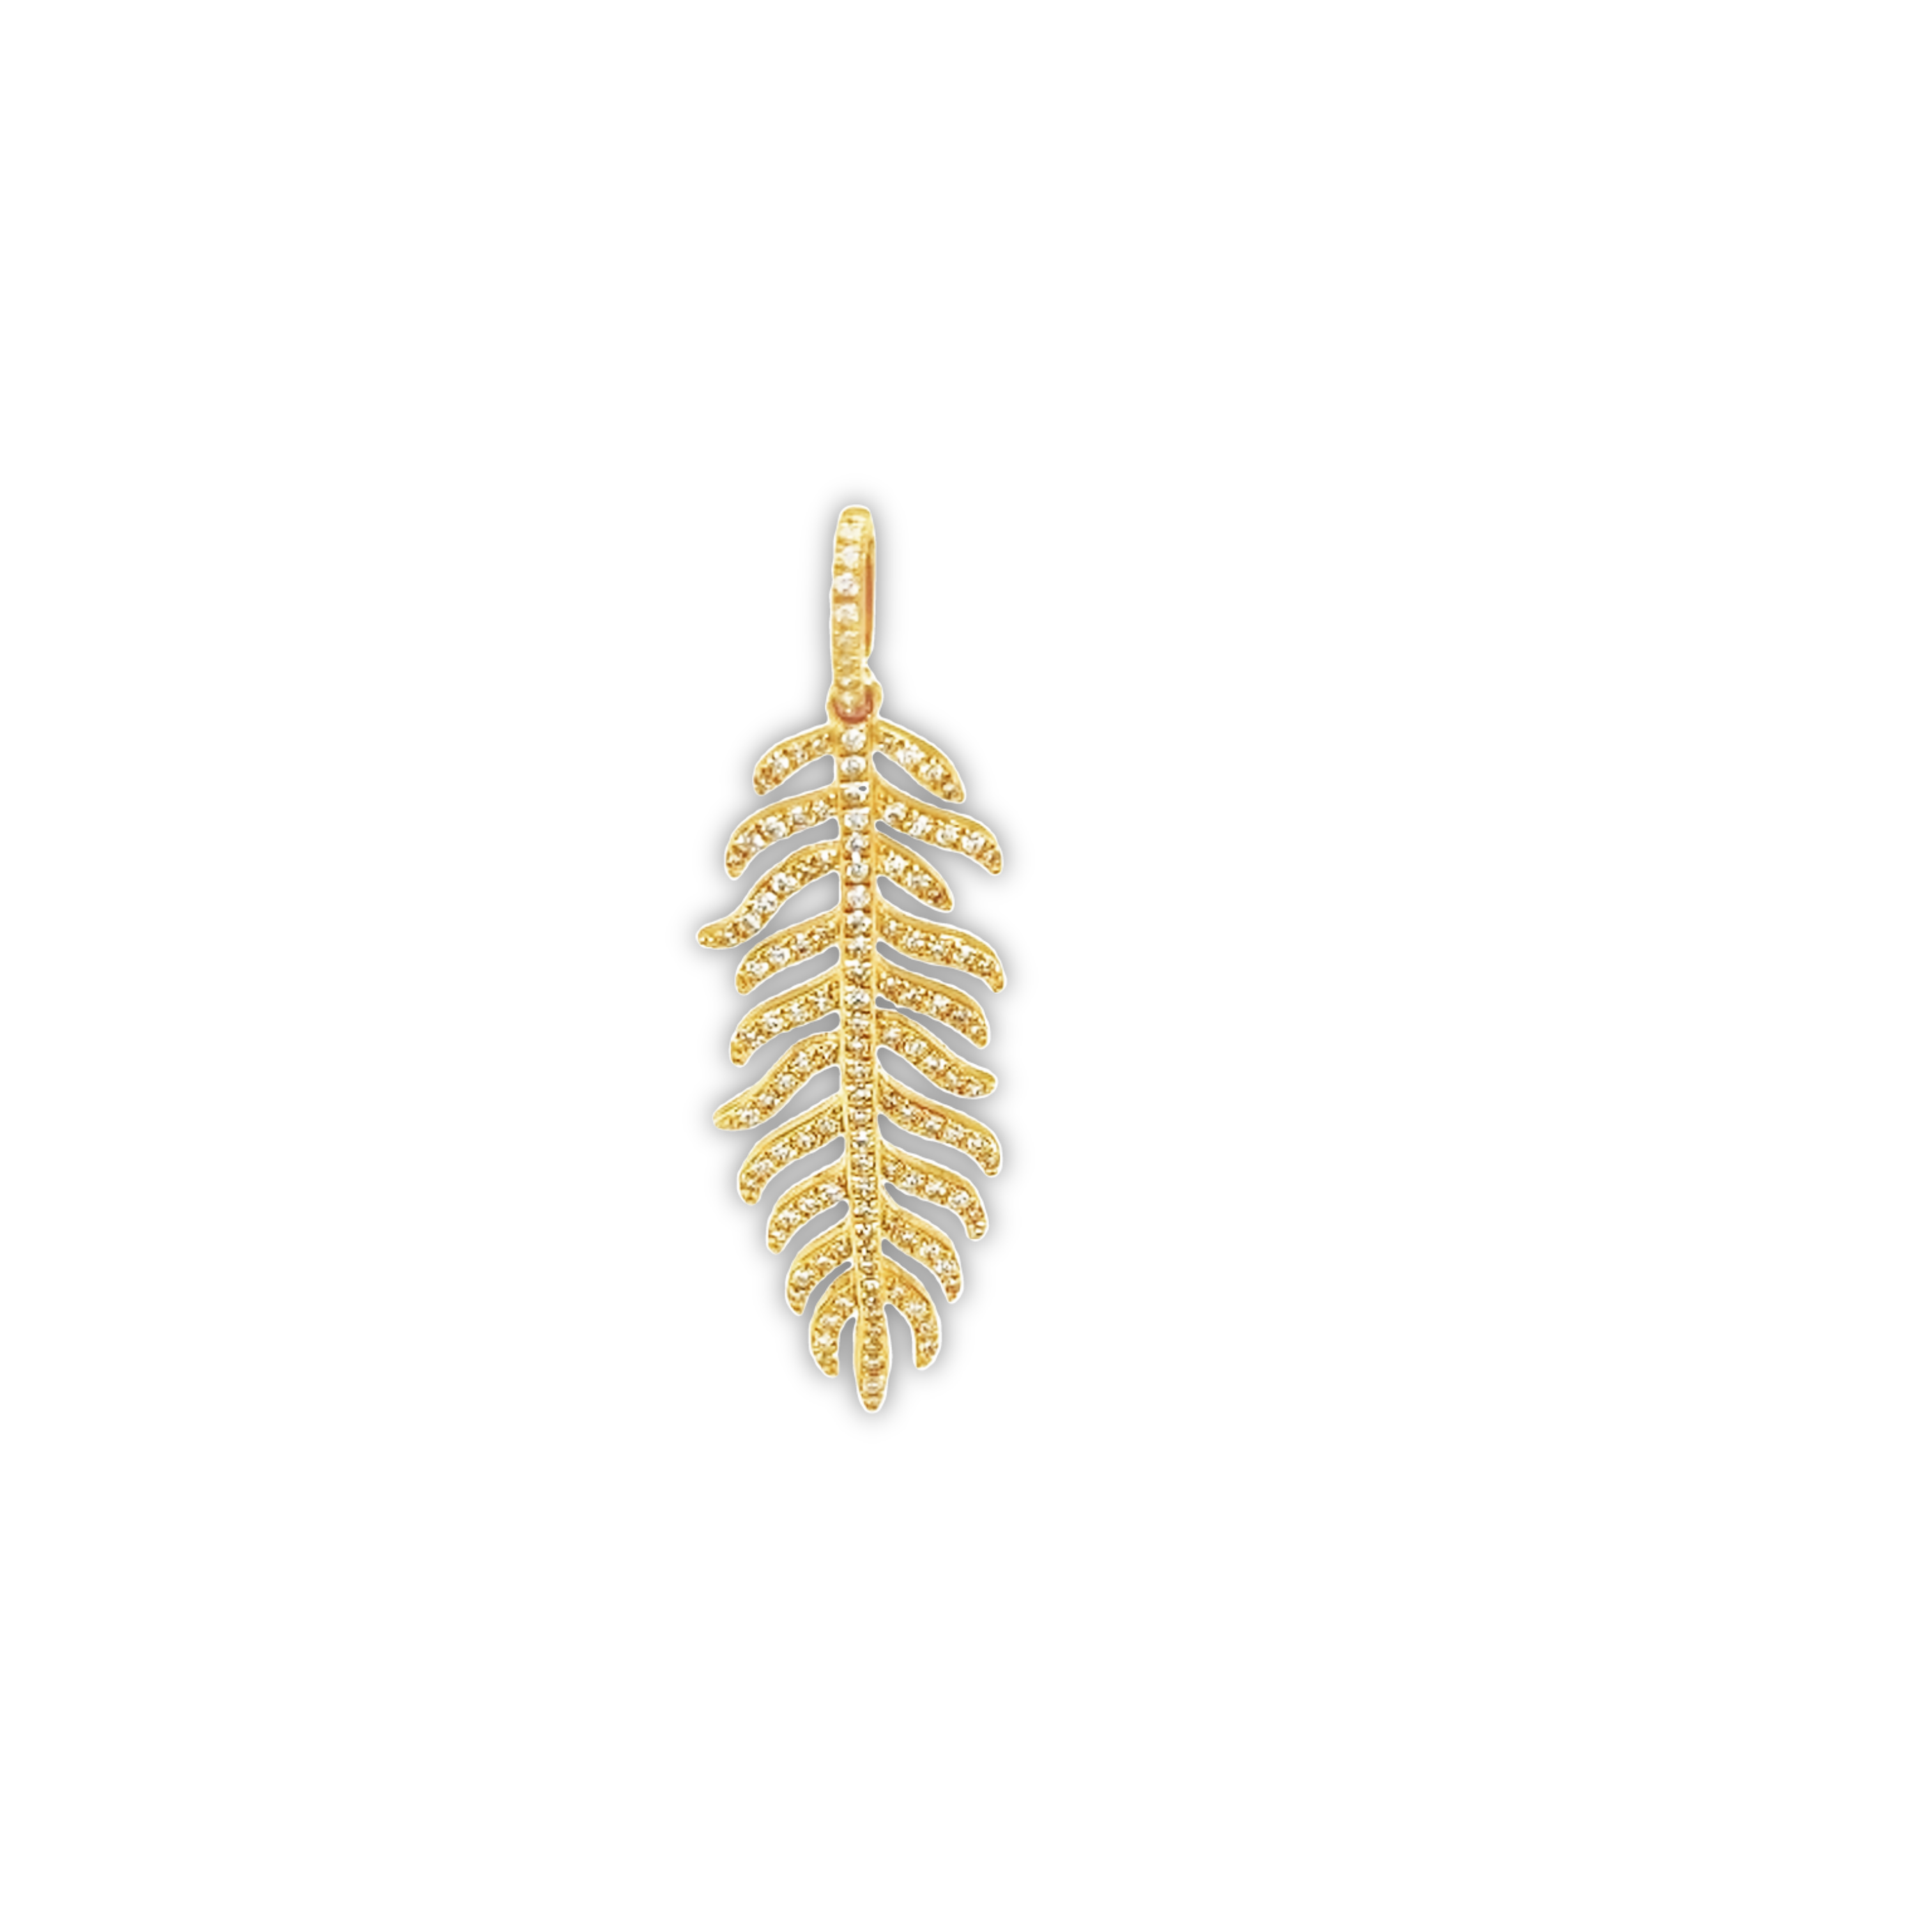 Featured image for “Diamond Feather Pendant”